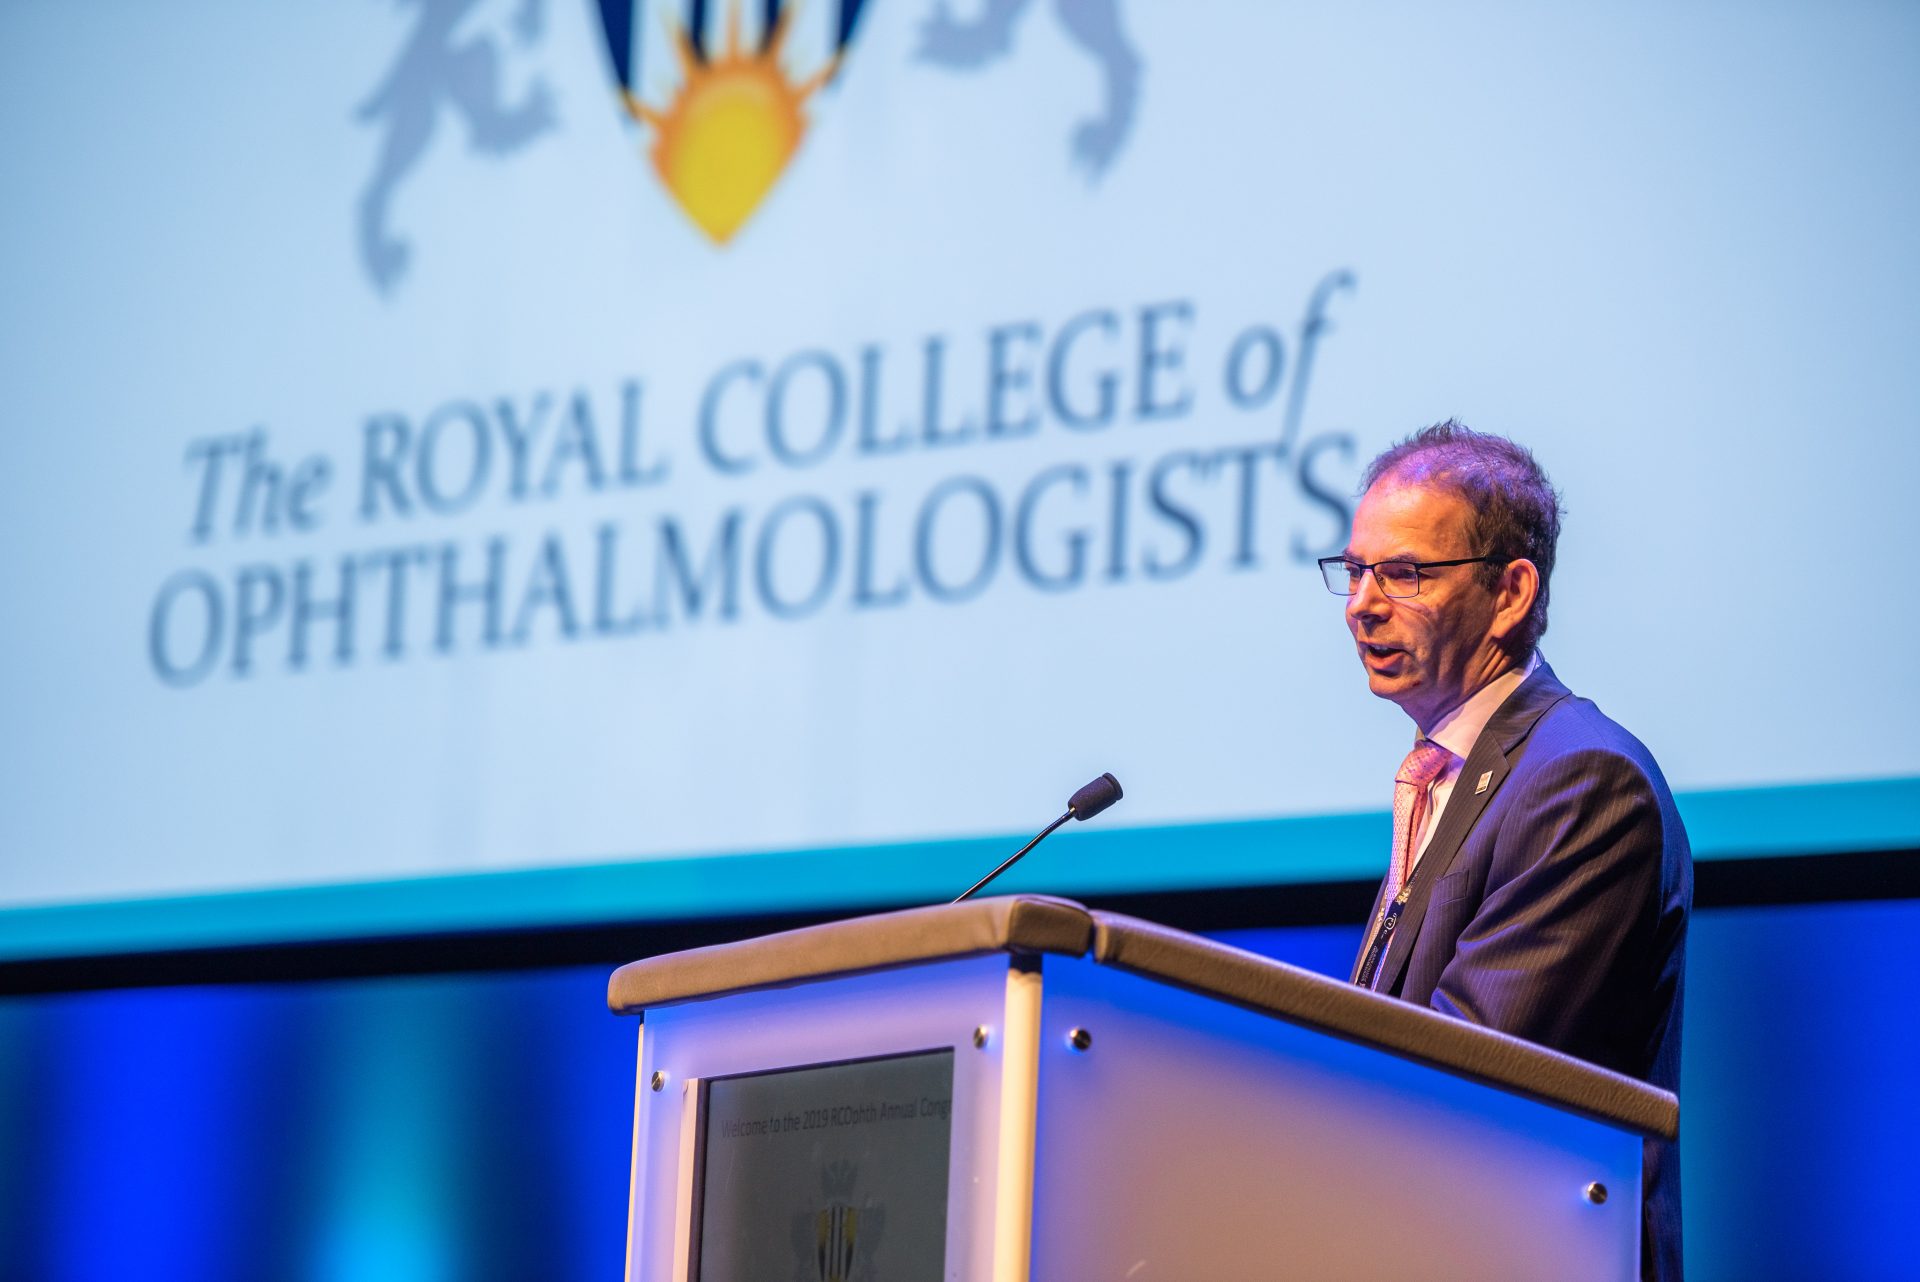 A speaker at the 2019 RCOphth congress.